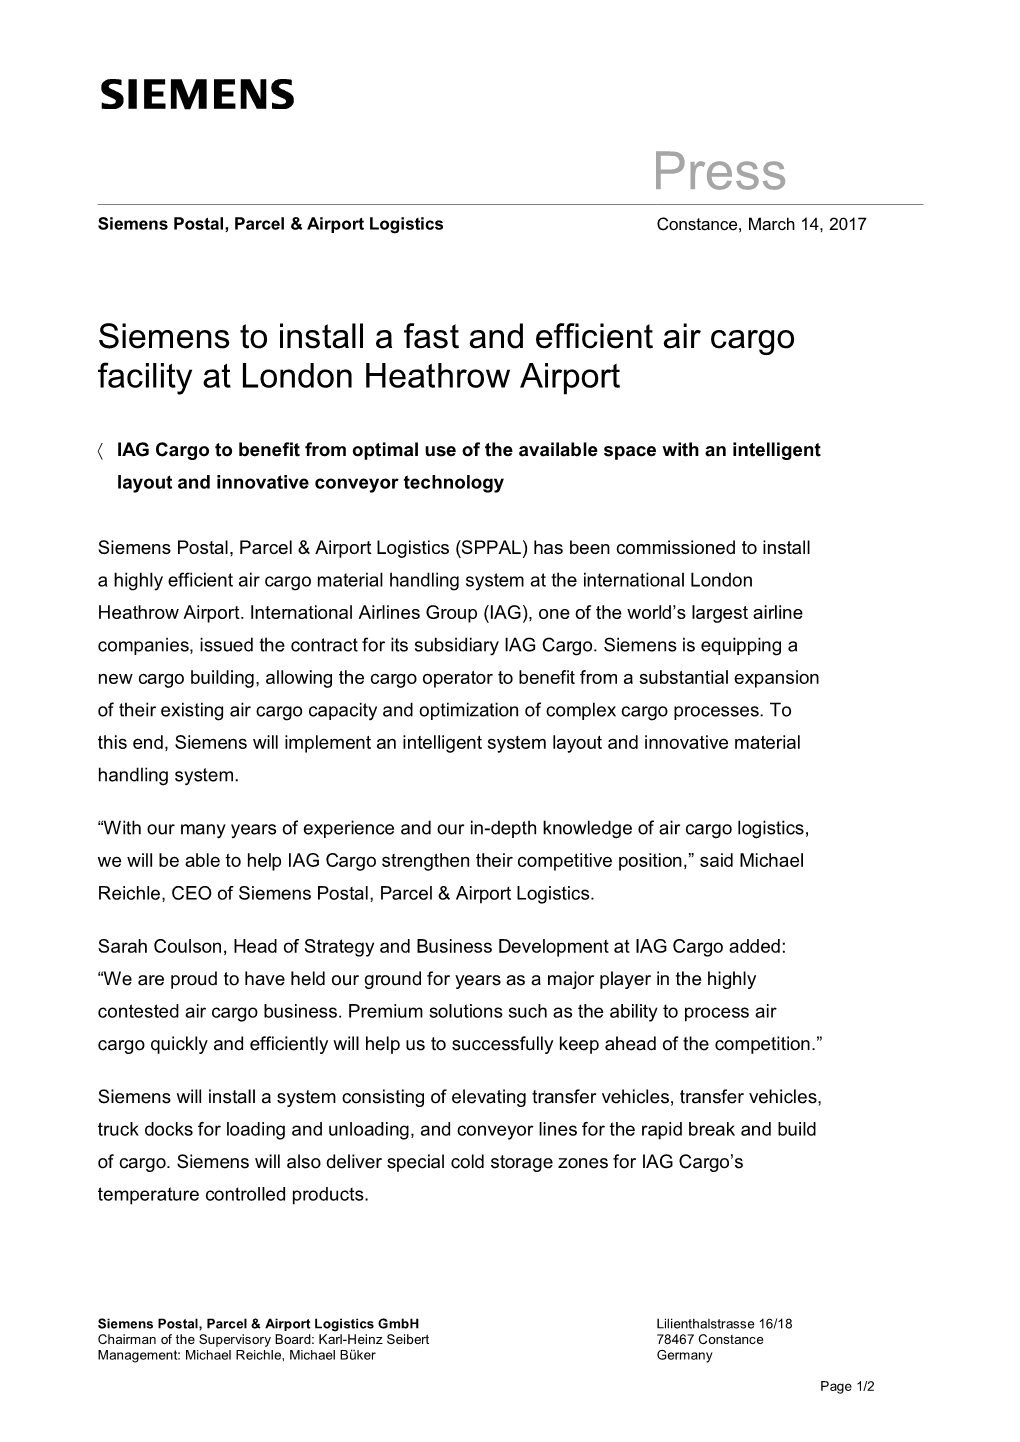 Siemens to Install a Fast and Efficient Air Cargo Facility at London Heathrow Airport